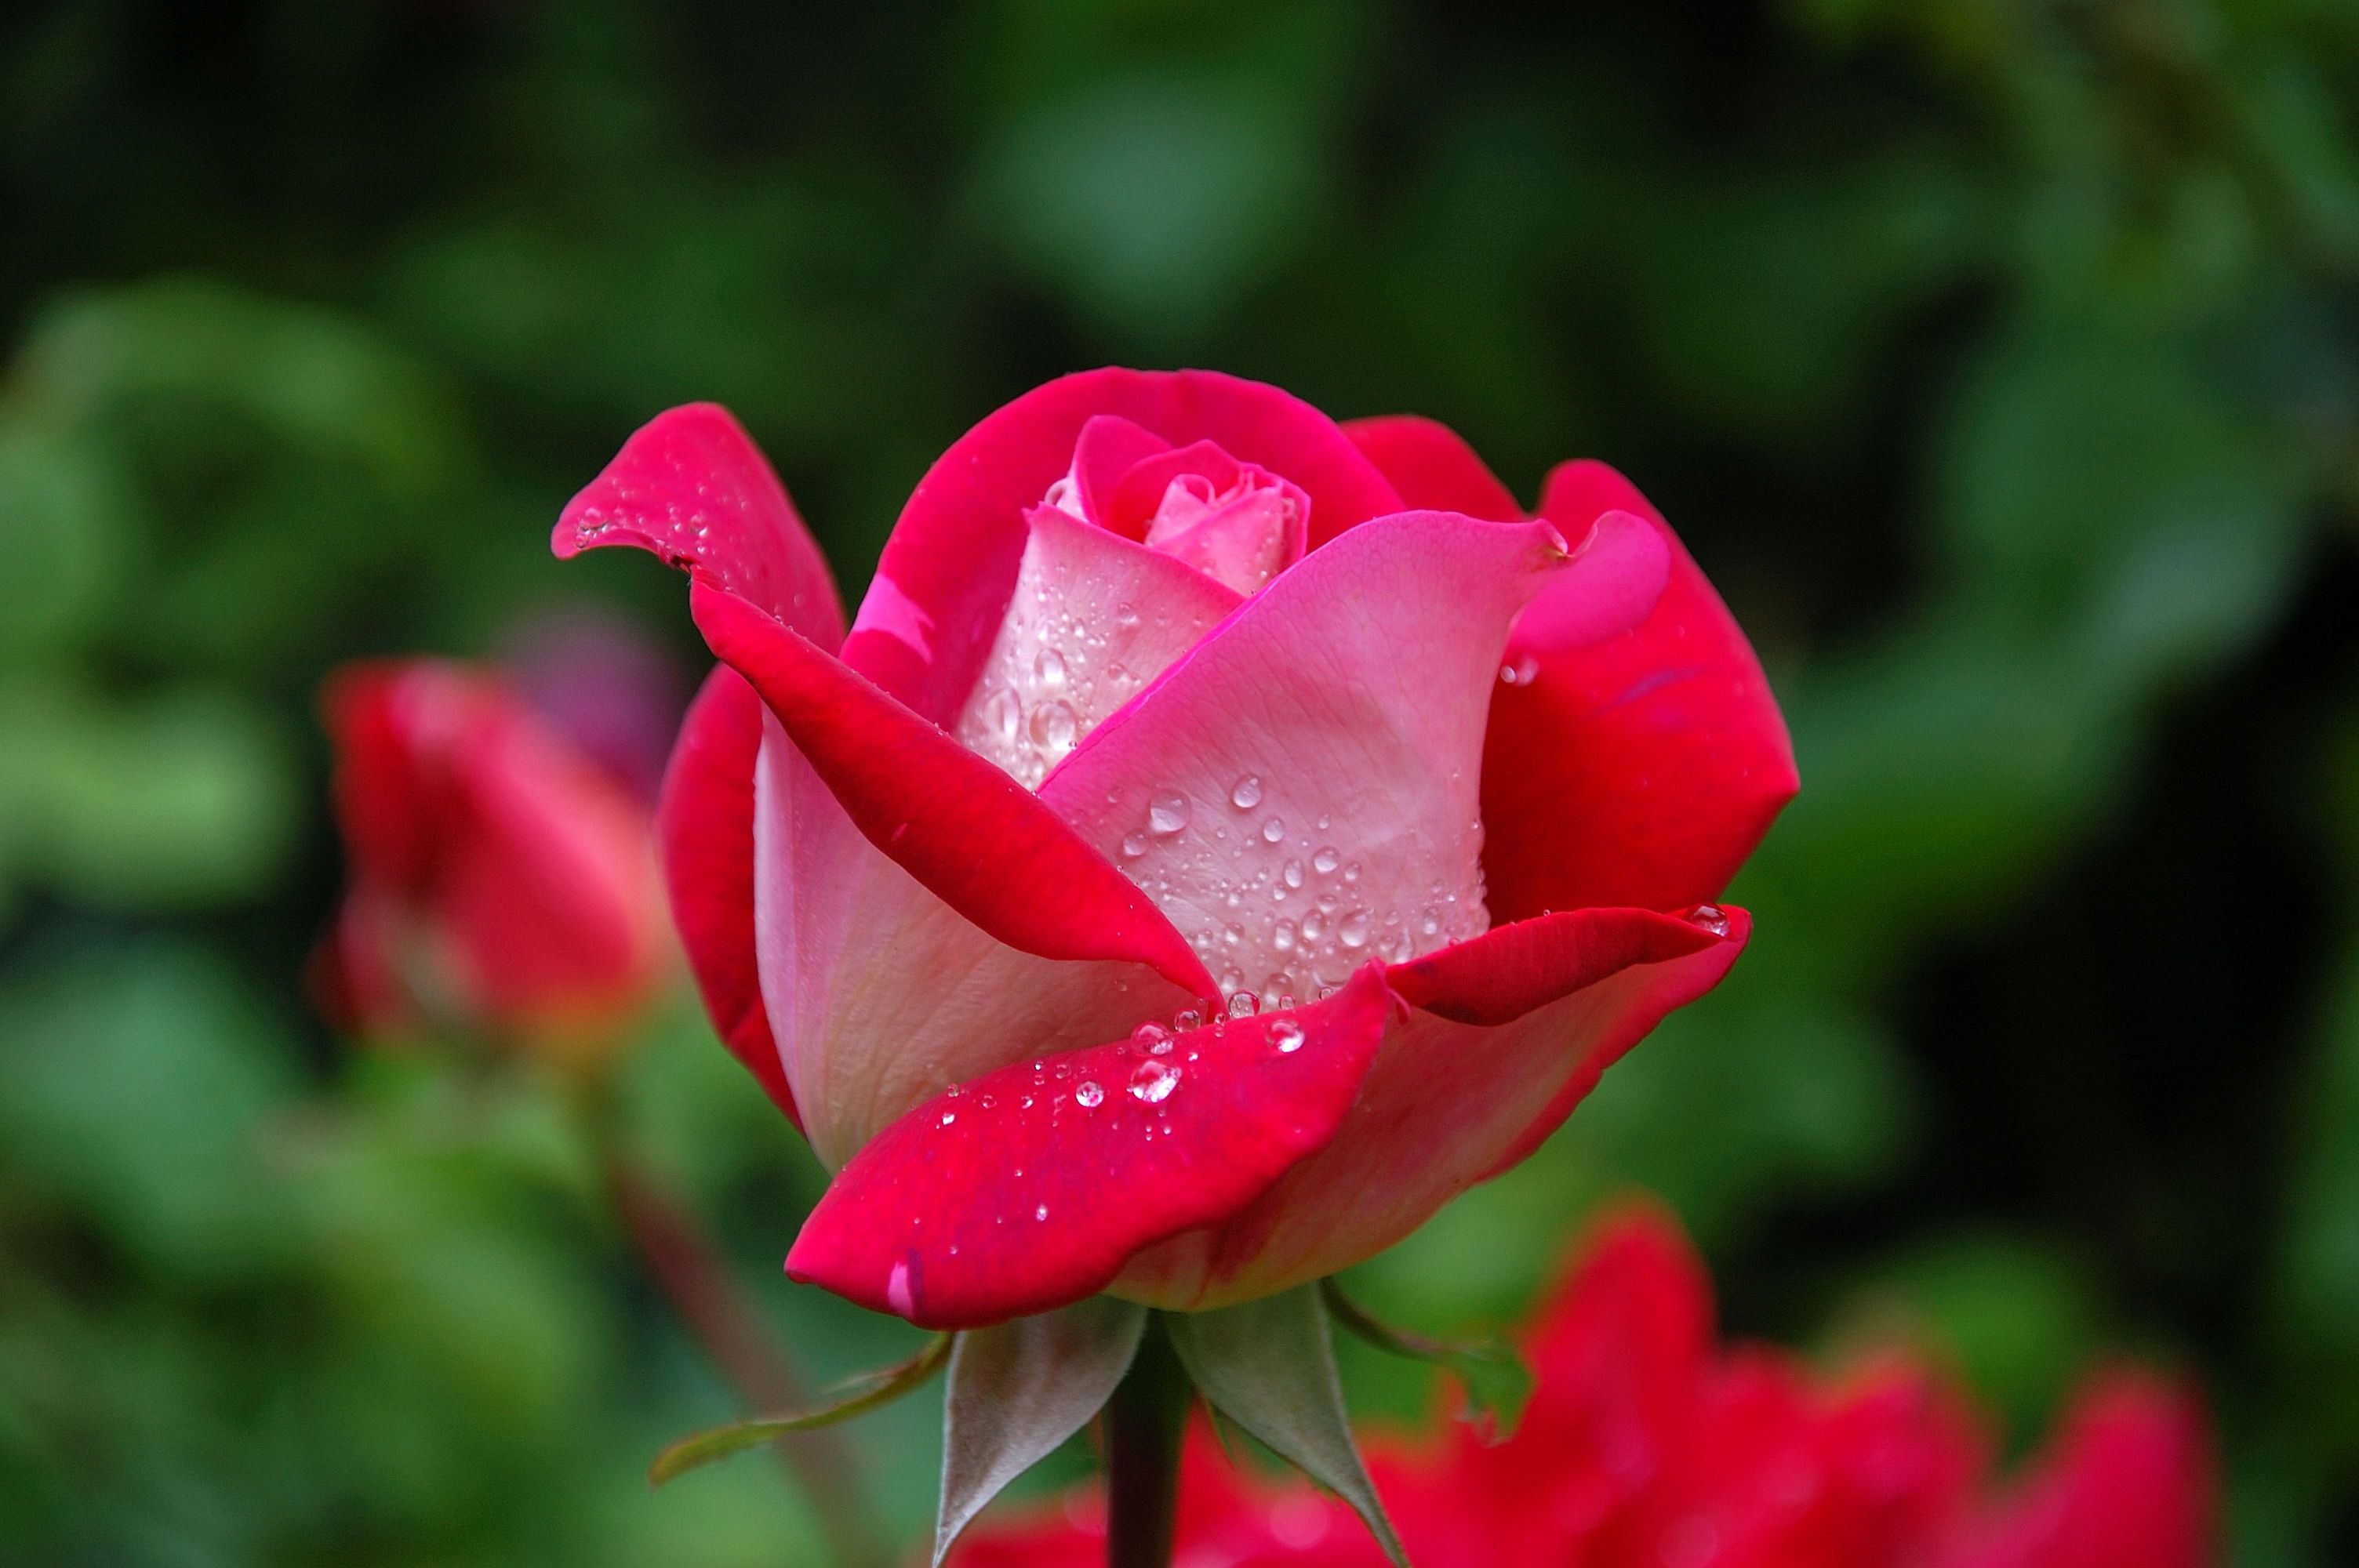 Photo of a red and pink rose in a garden